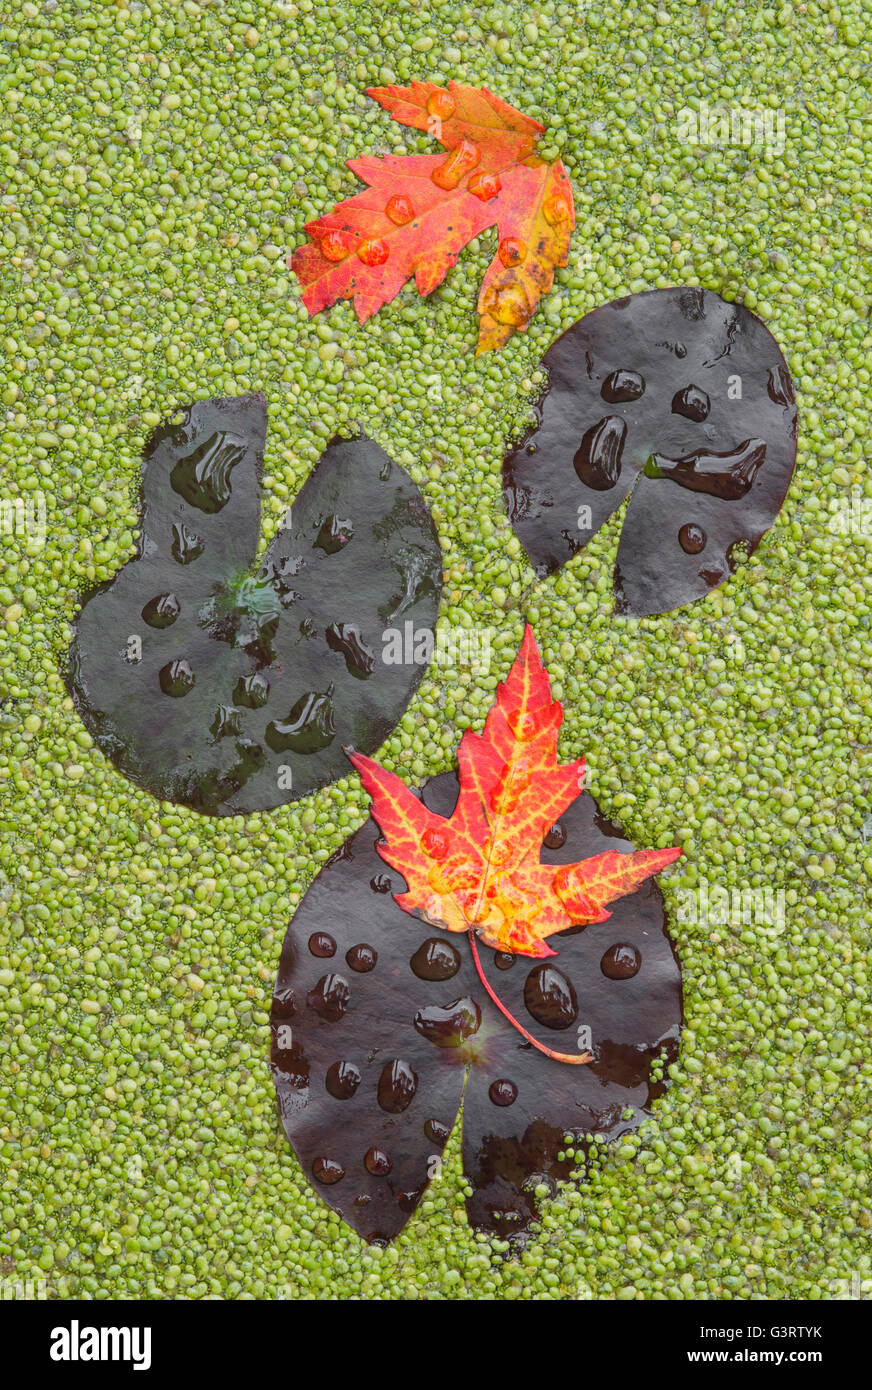 Water Lilys (Nymphaea odorata), Silver Maple Leaves (Acer saccharinum) and Duckweed (Lemna) on pond   E USA Stock Photo